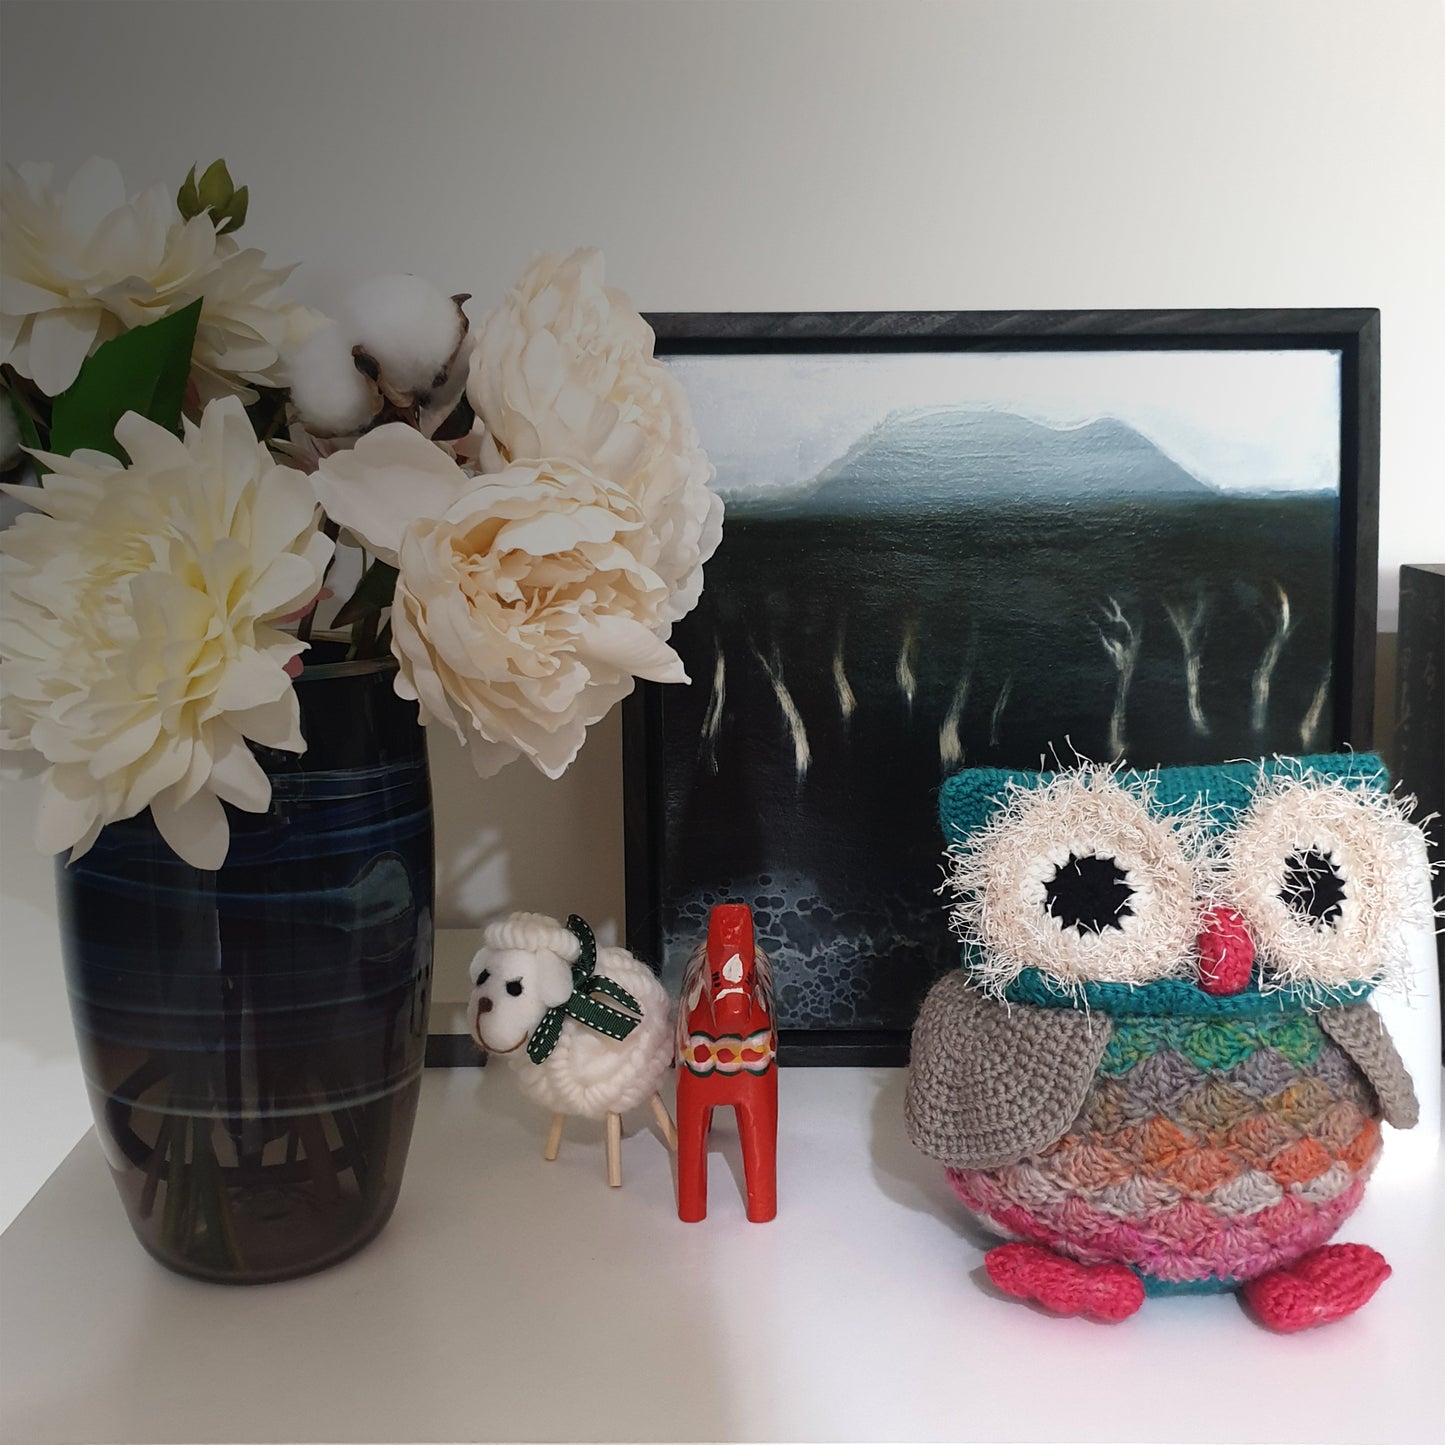 Colourful, cuddly crocheted toy Owl